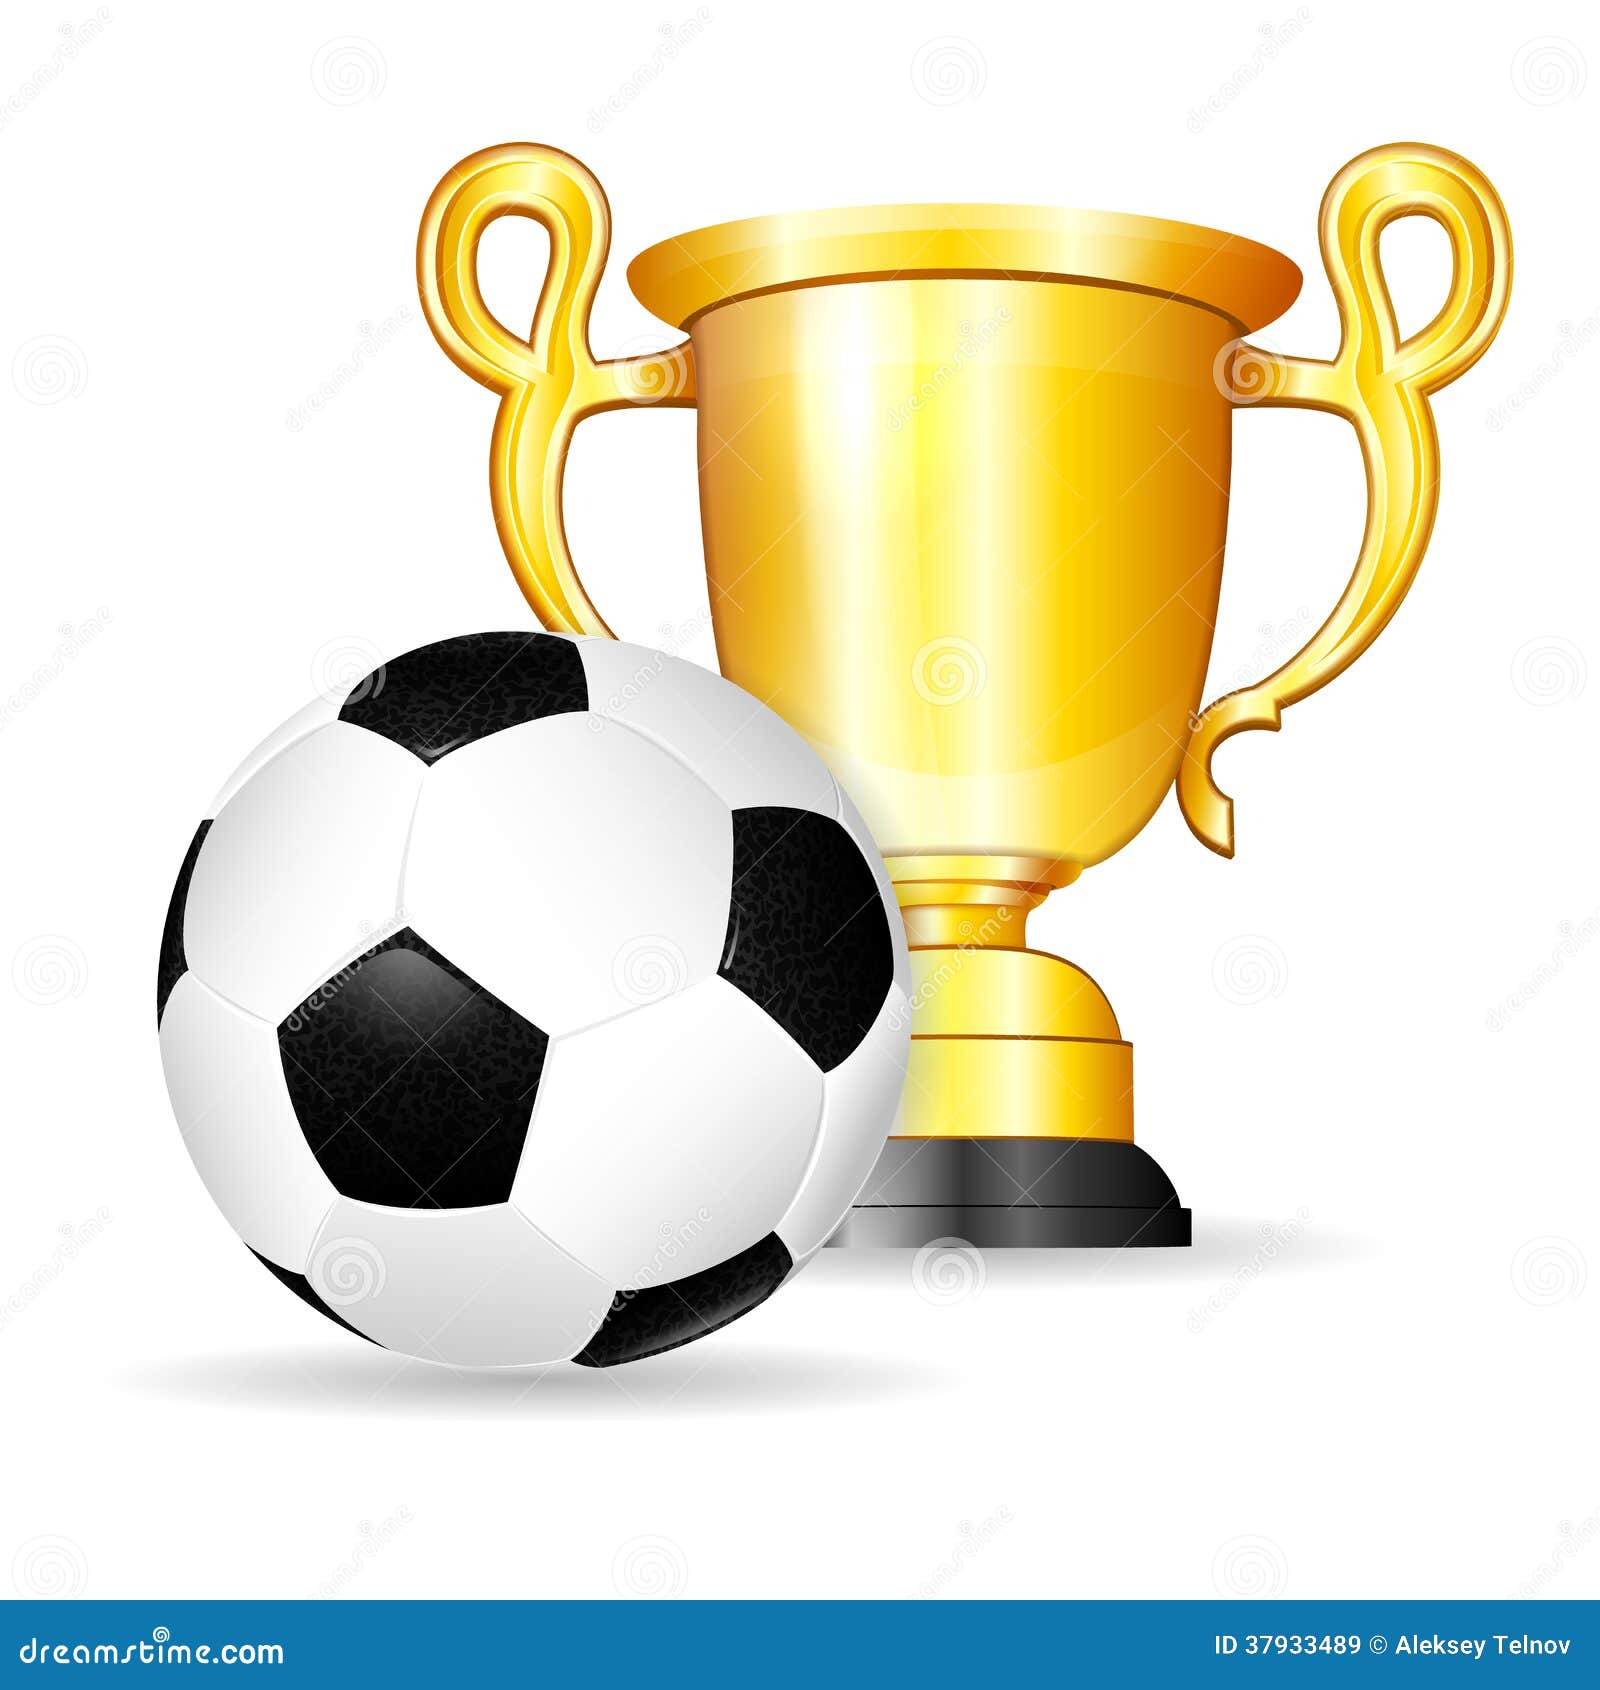 football cup clipart - photo #29